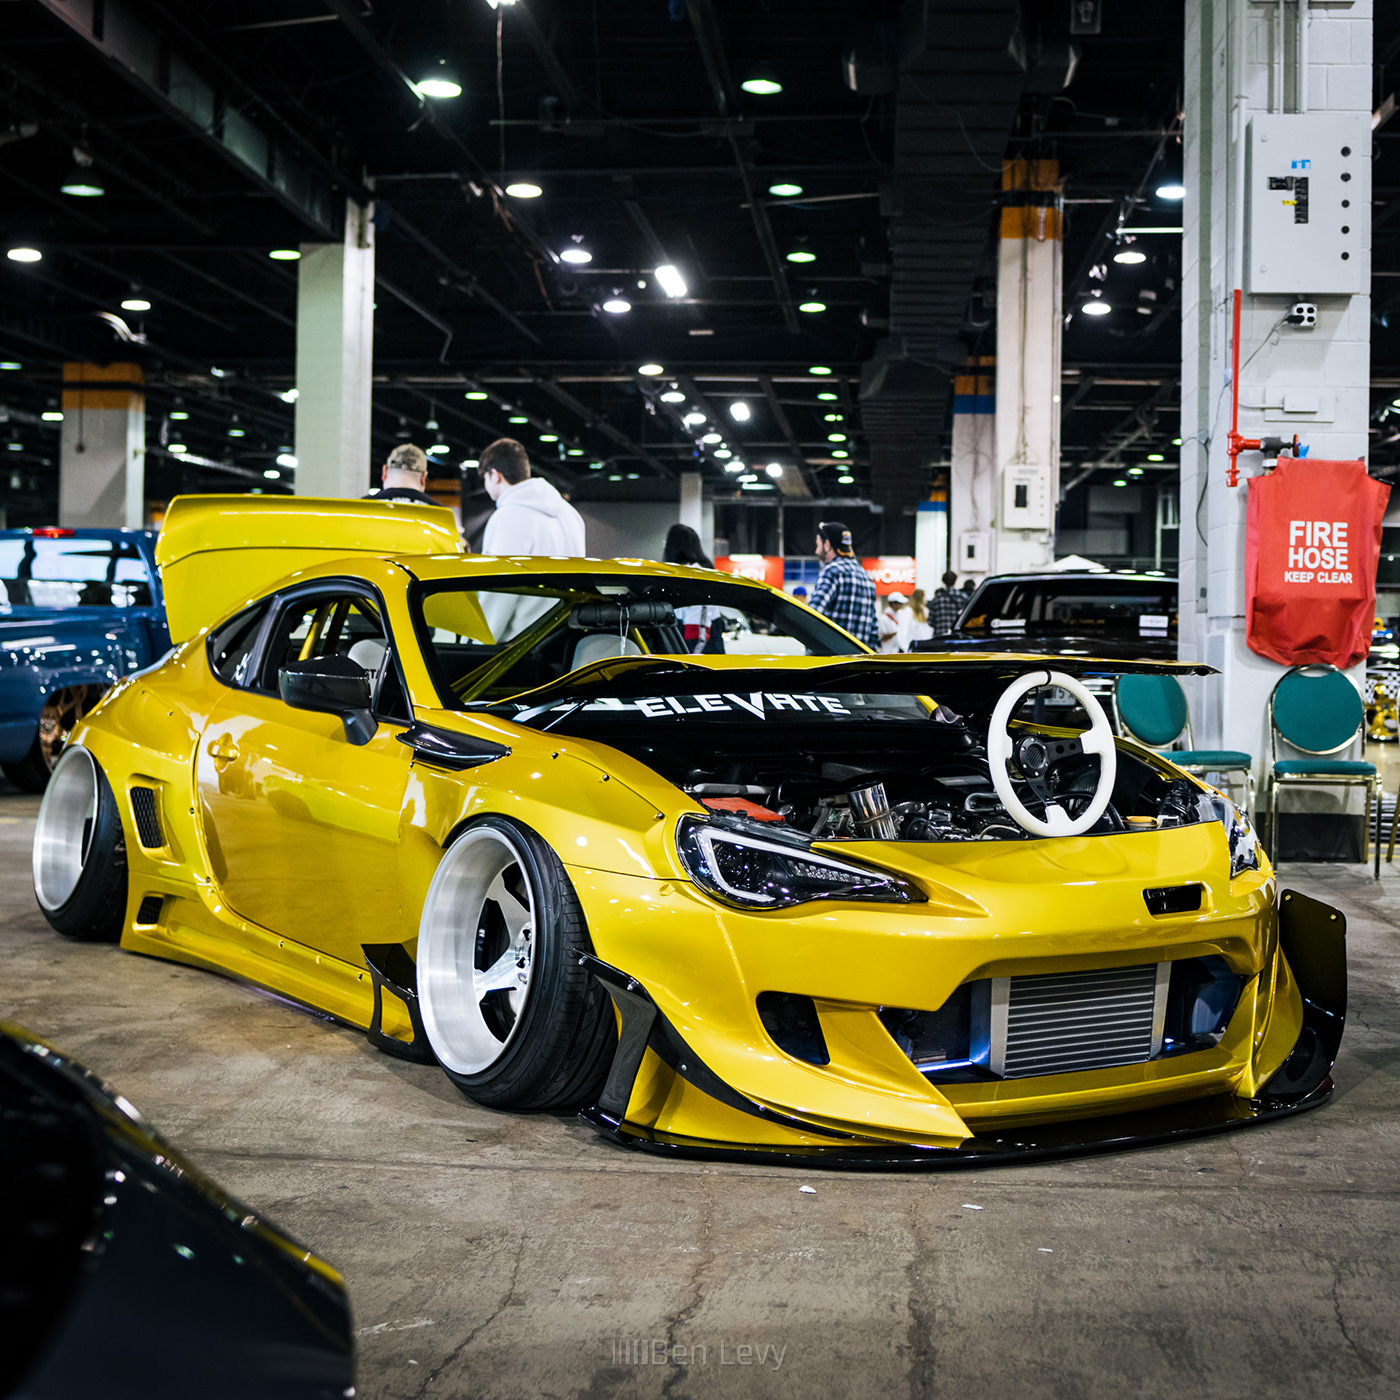 Bagged Scion FR-S with Gold Wrap